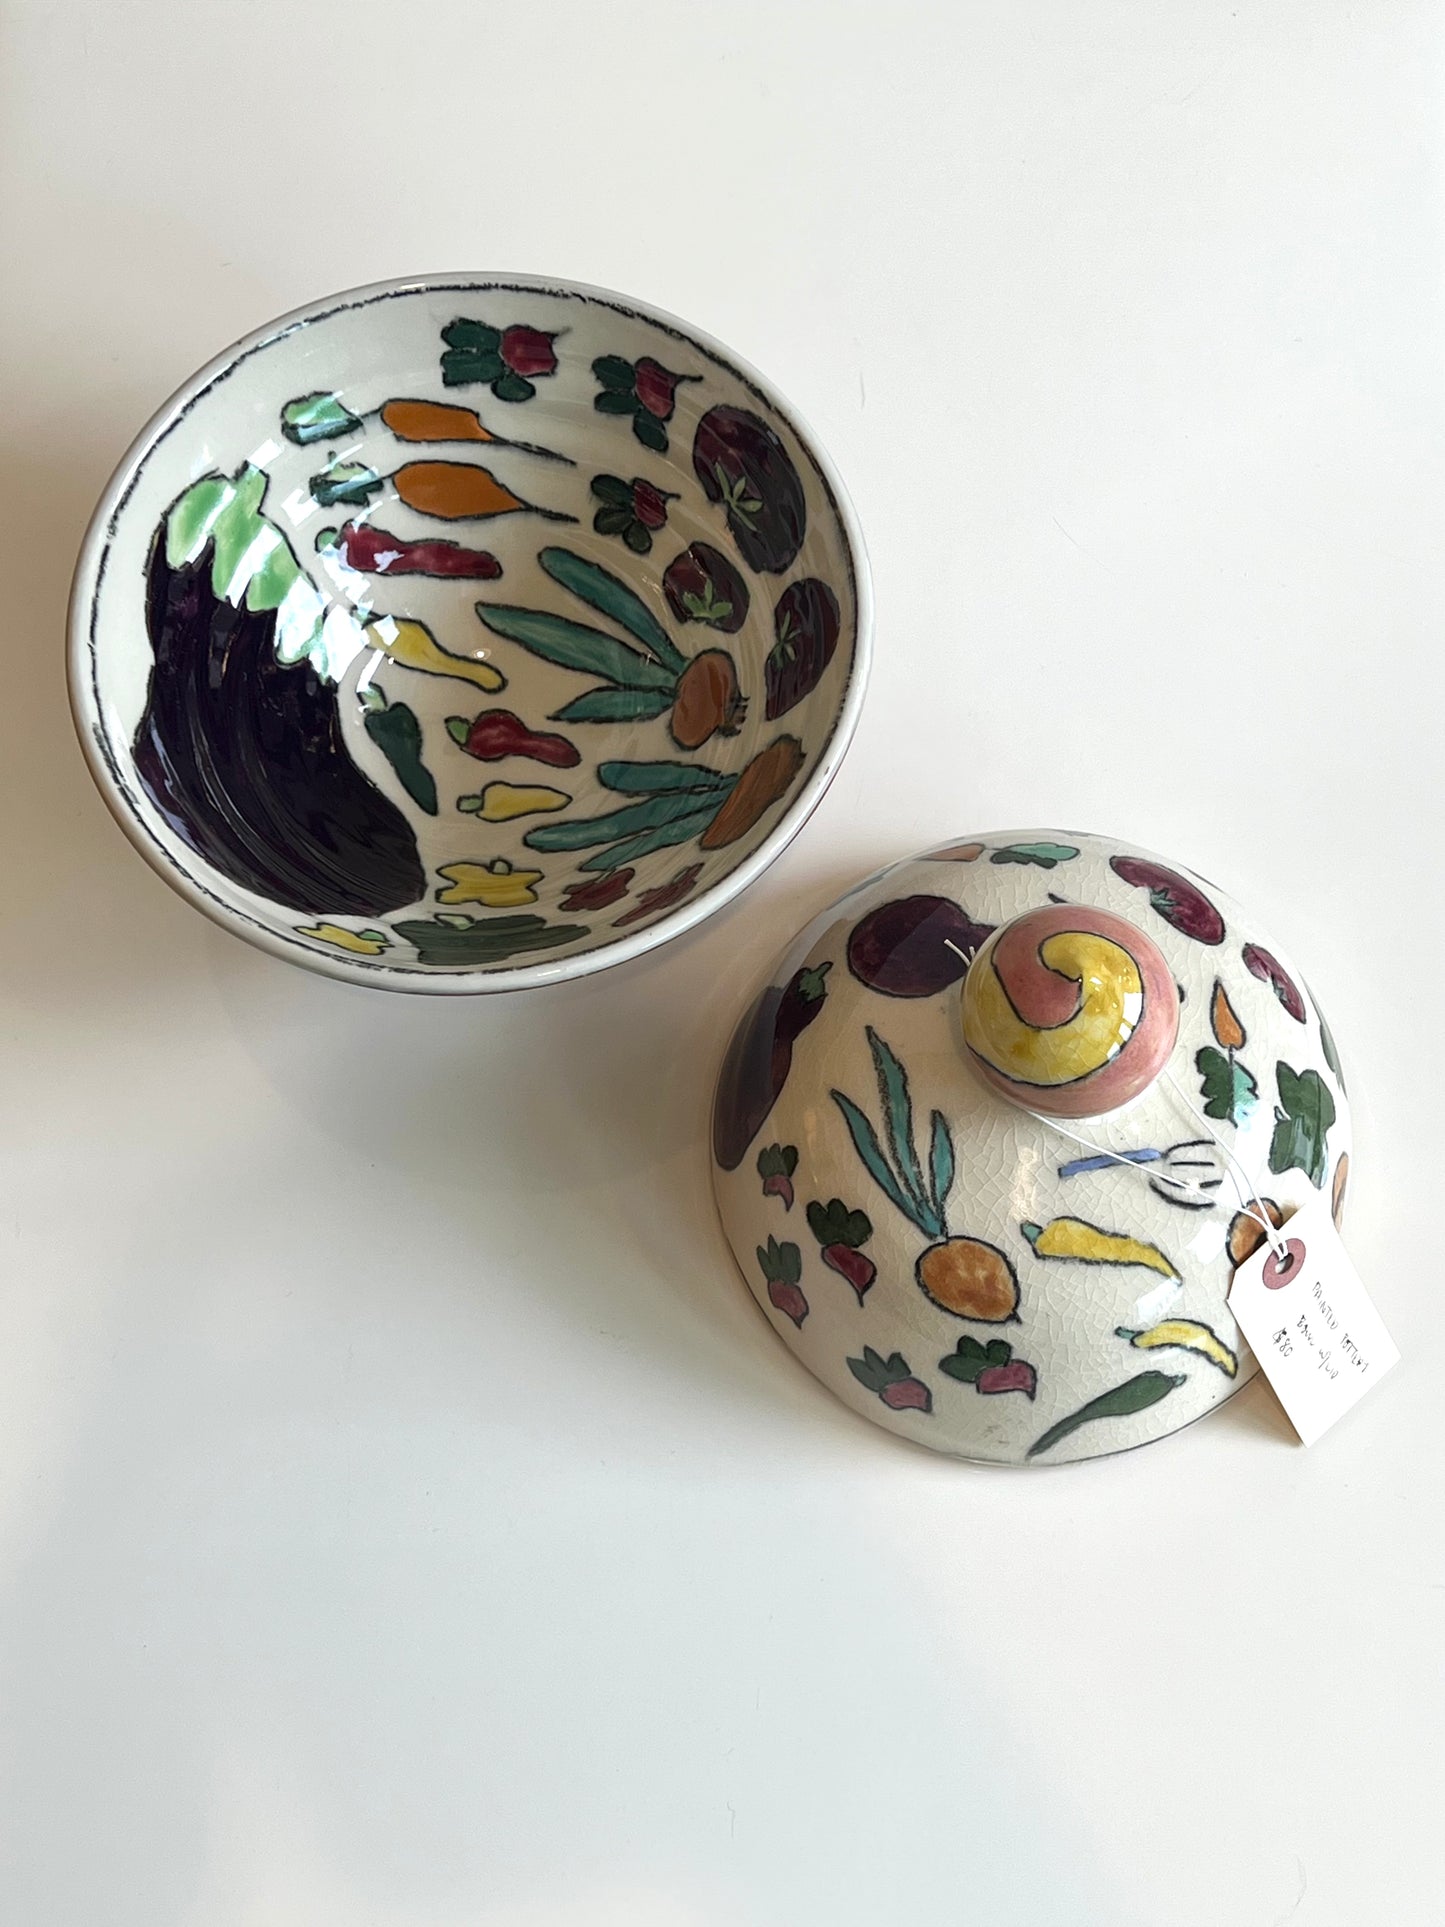 Painted Ceramic Lidded Dishes